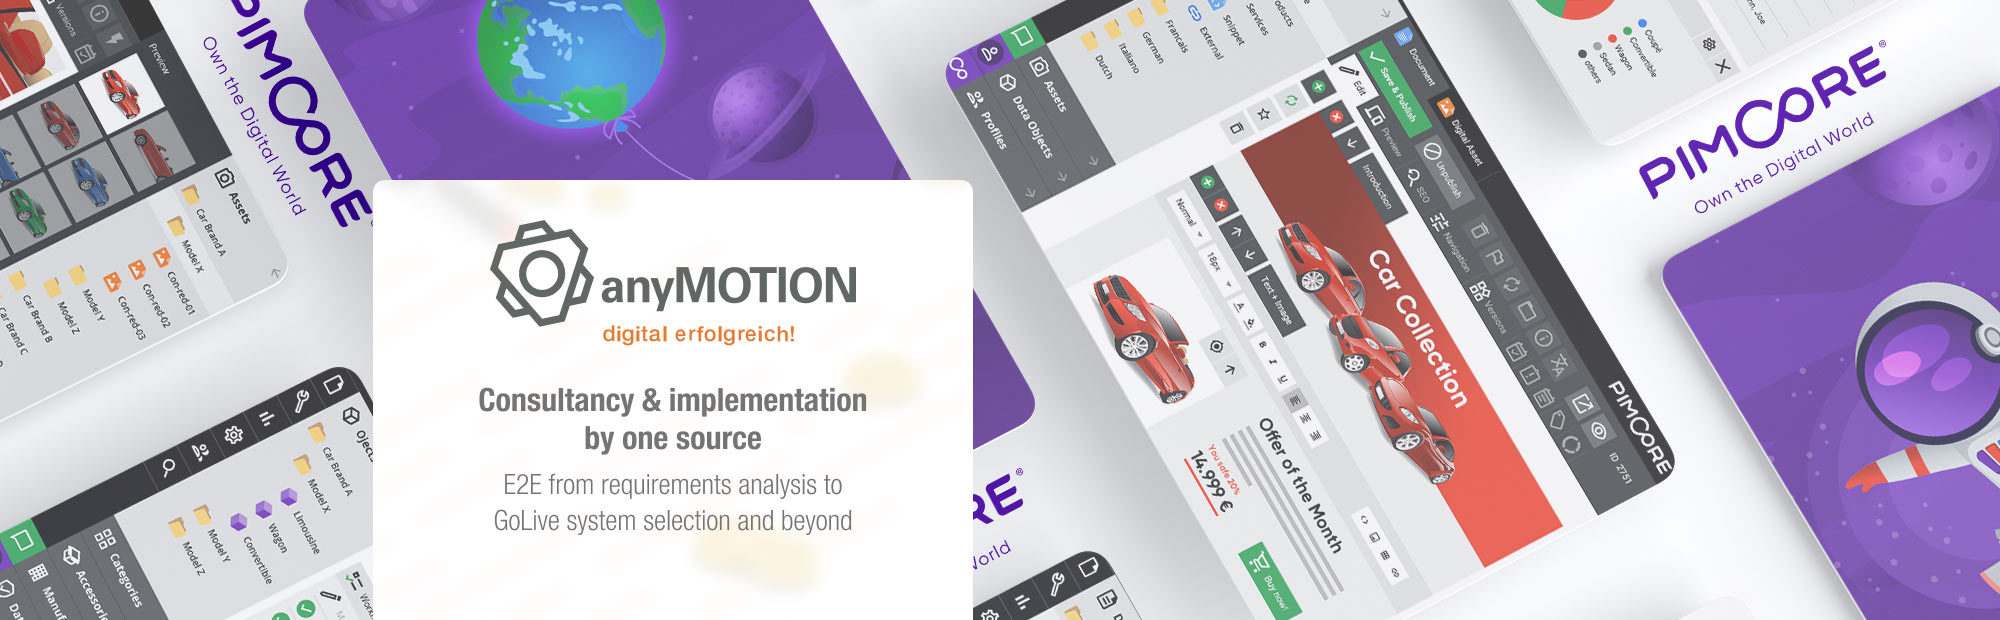 anyMOTION PIM consulting and implementation from a single source